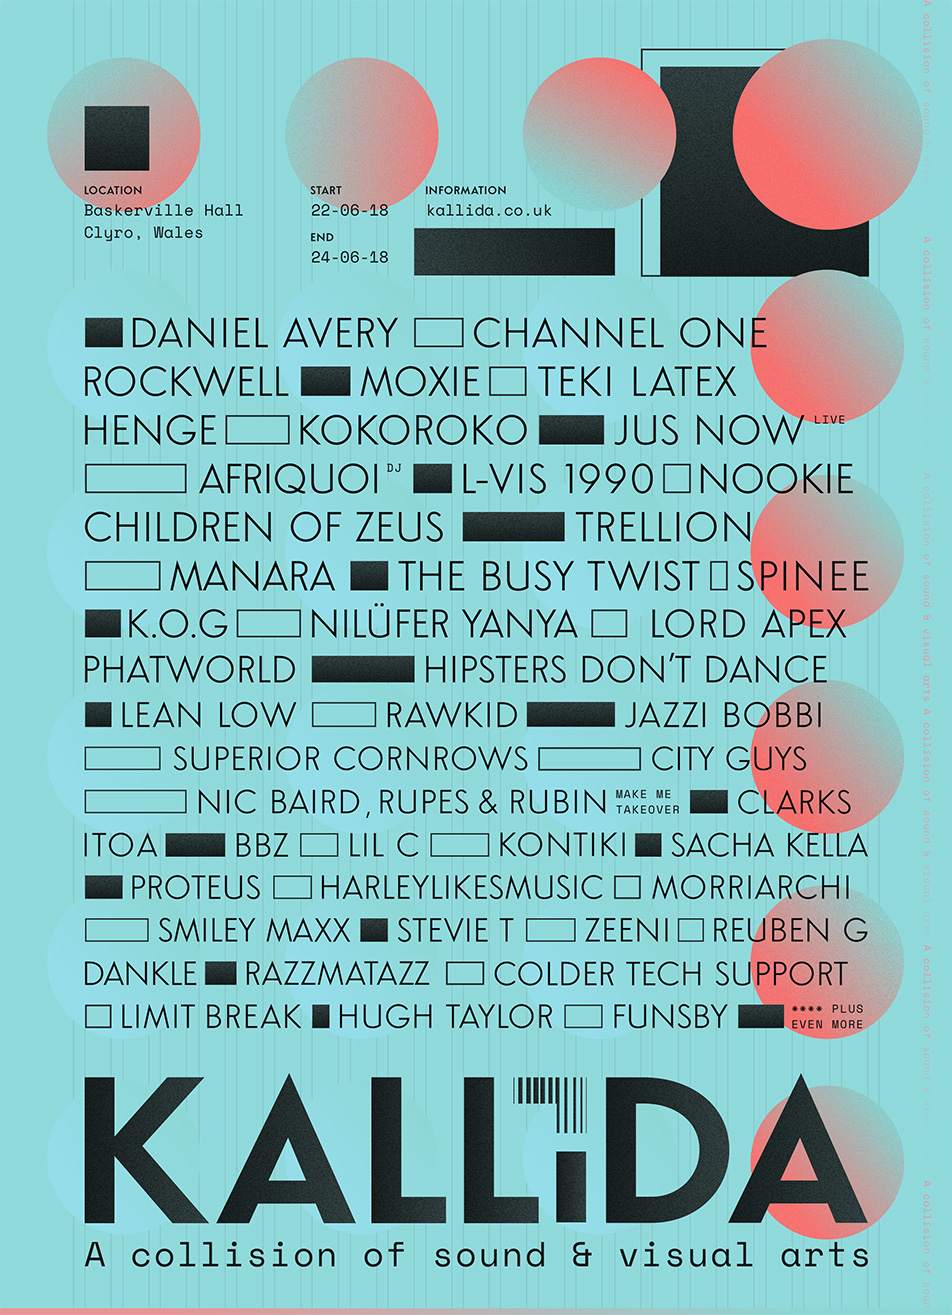 KALLIDA Festival reveals second batch of acts for 2018 image